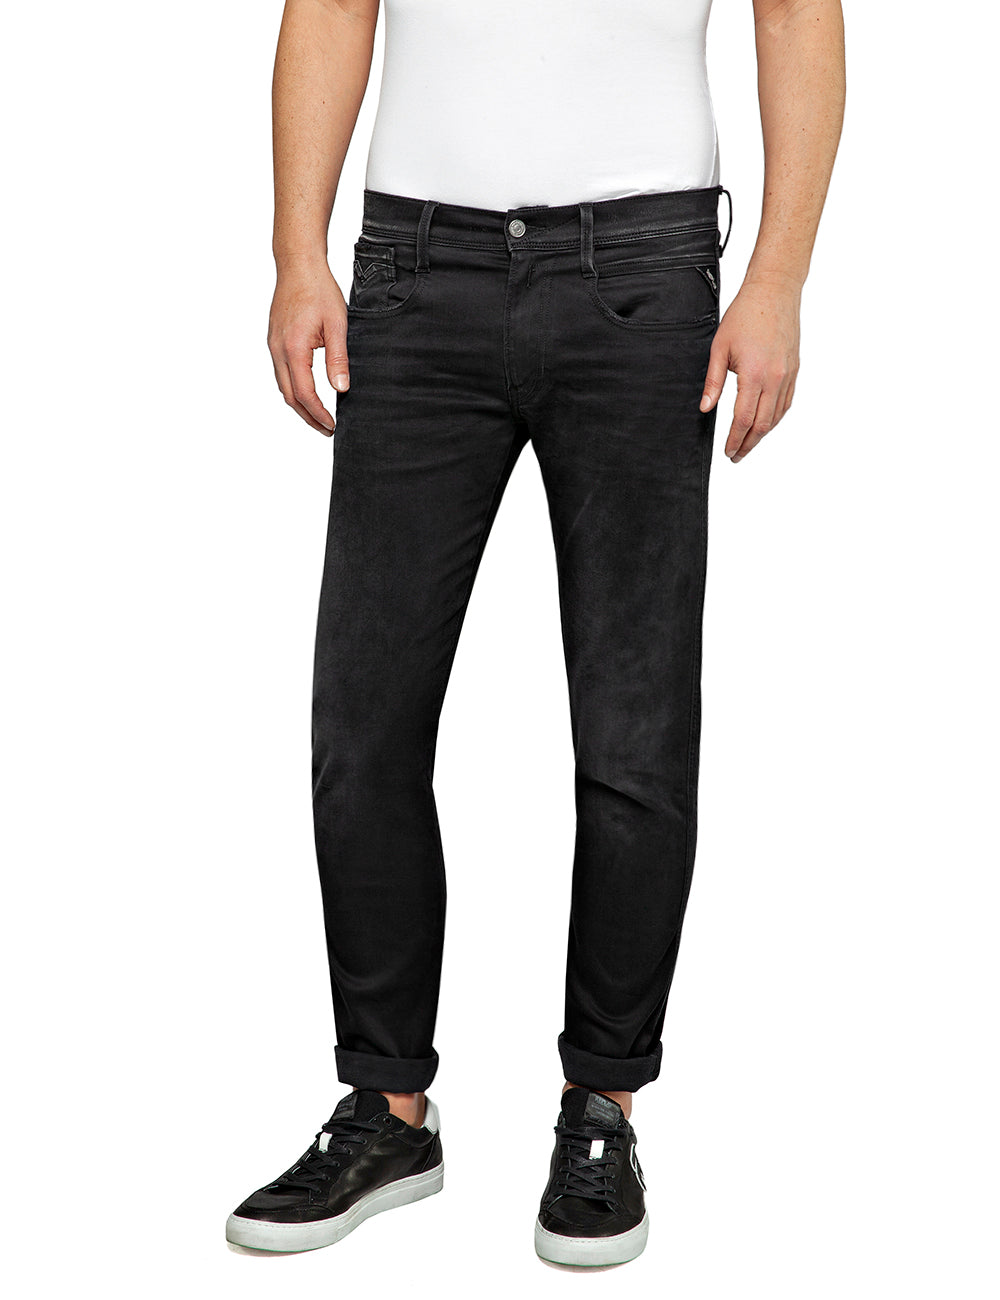 Replay Hyper-Flex Black Washed Stretch Jeans